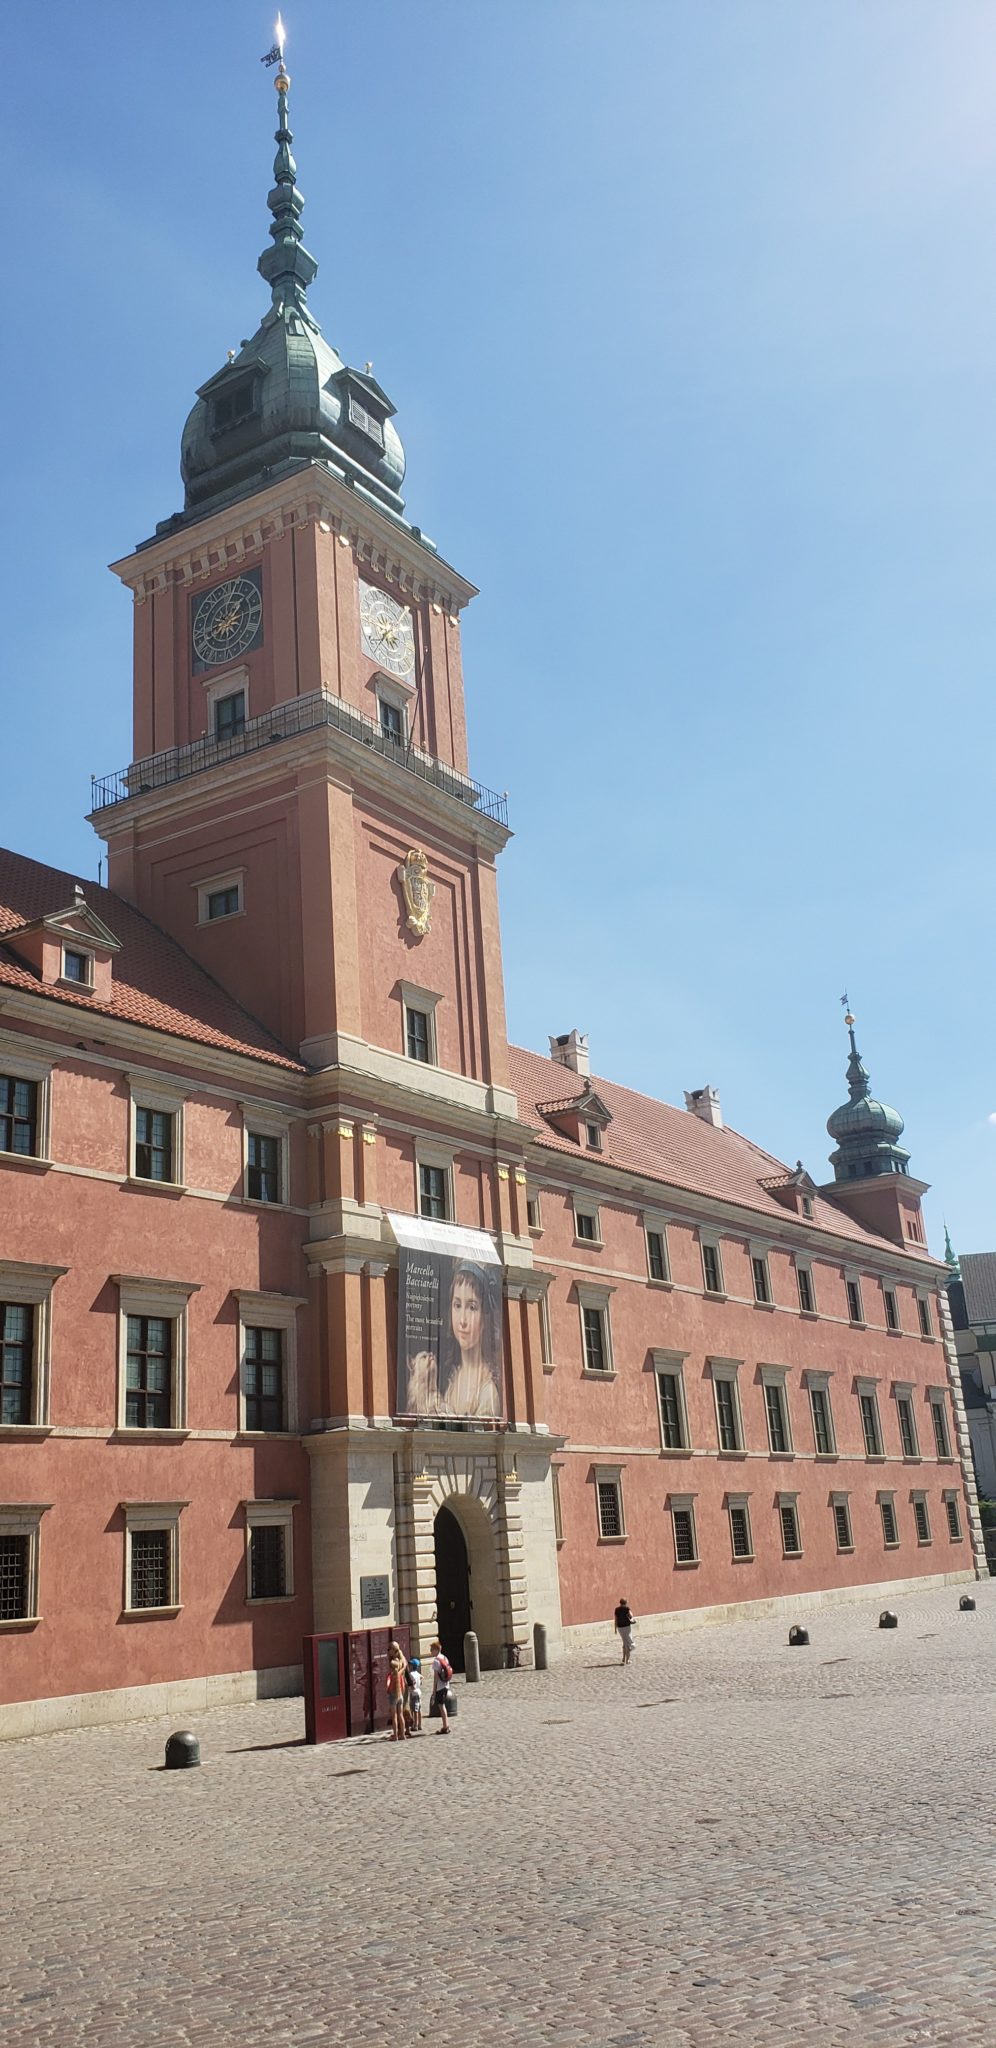 Royal Castle, Warsaw with a clock tower